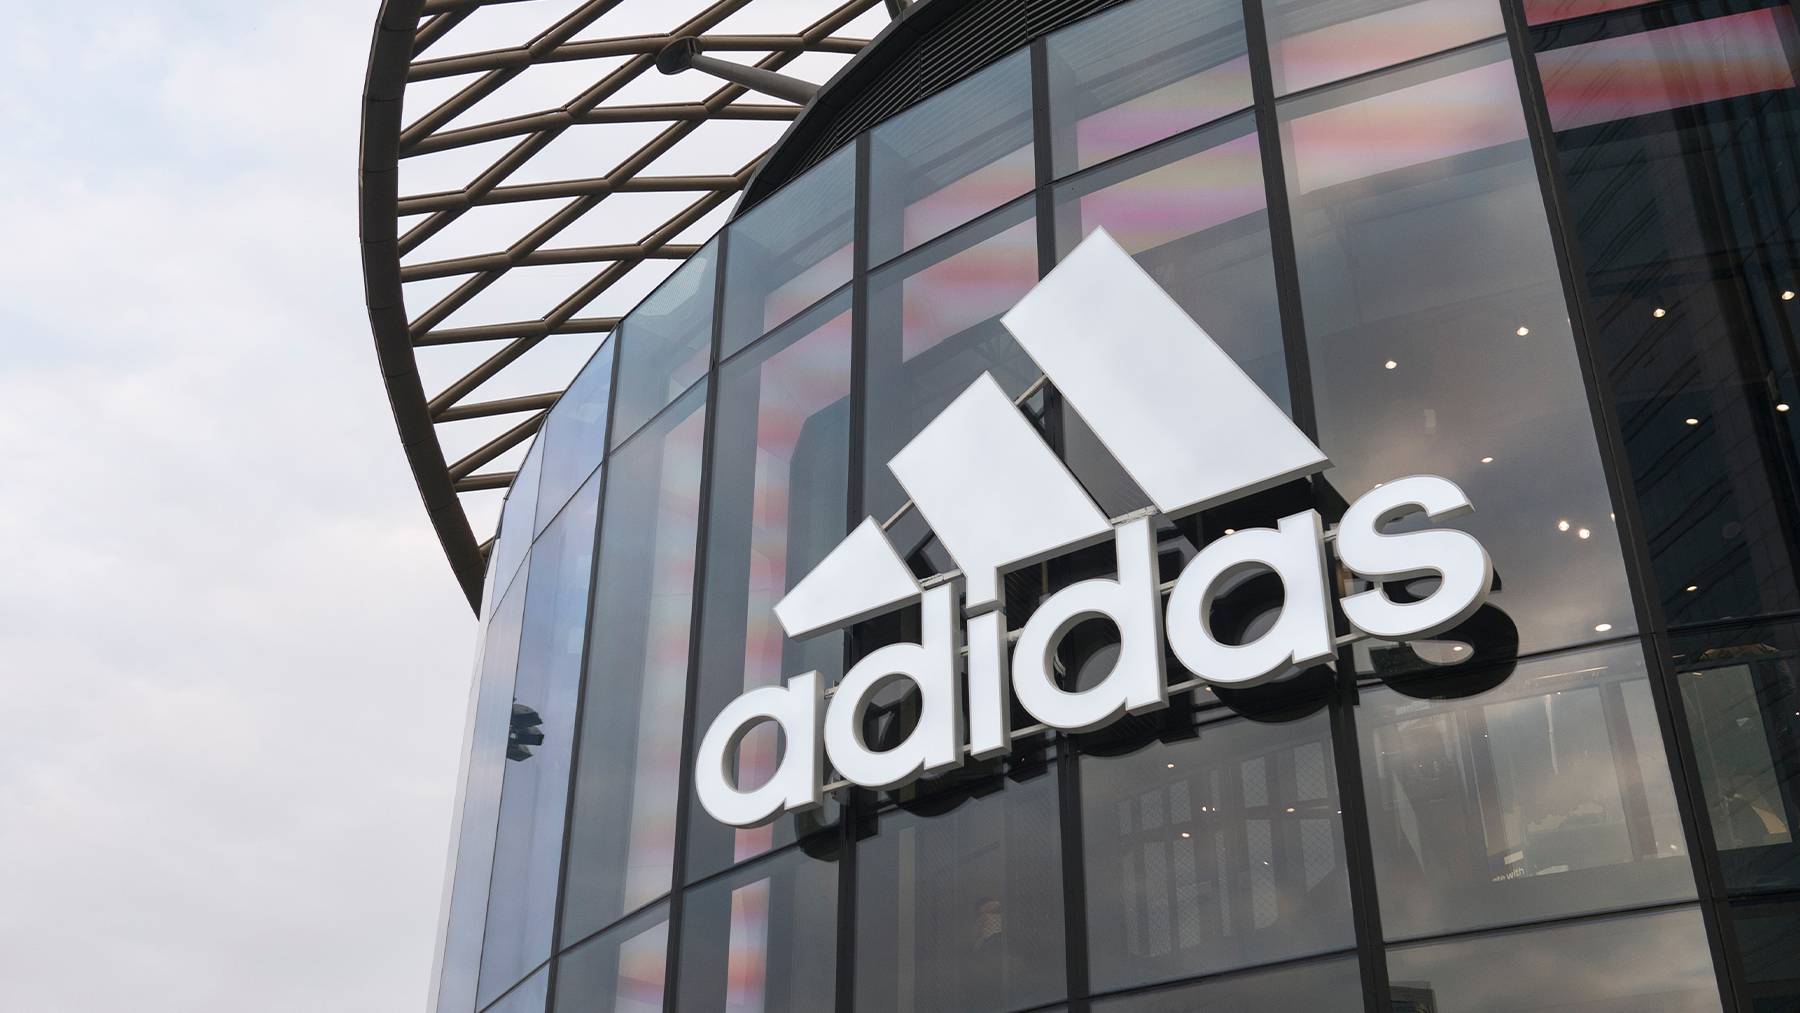 A shot of the Adidas logo on a glass storefront.